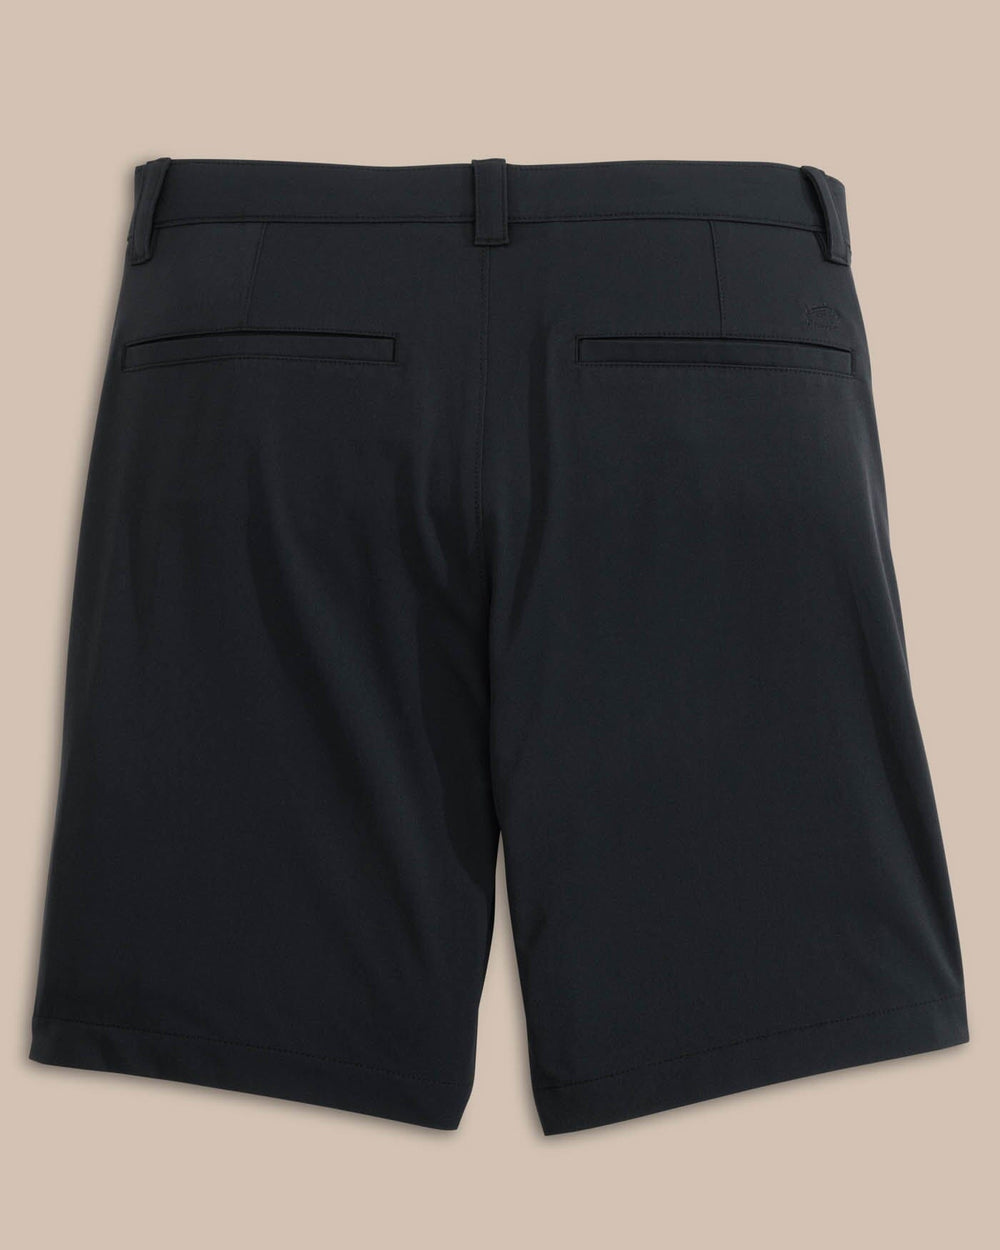 The back view of the Southern Tide brrr die 8 Performance Short by Southern Tide - Caviar Black